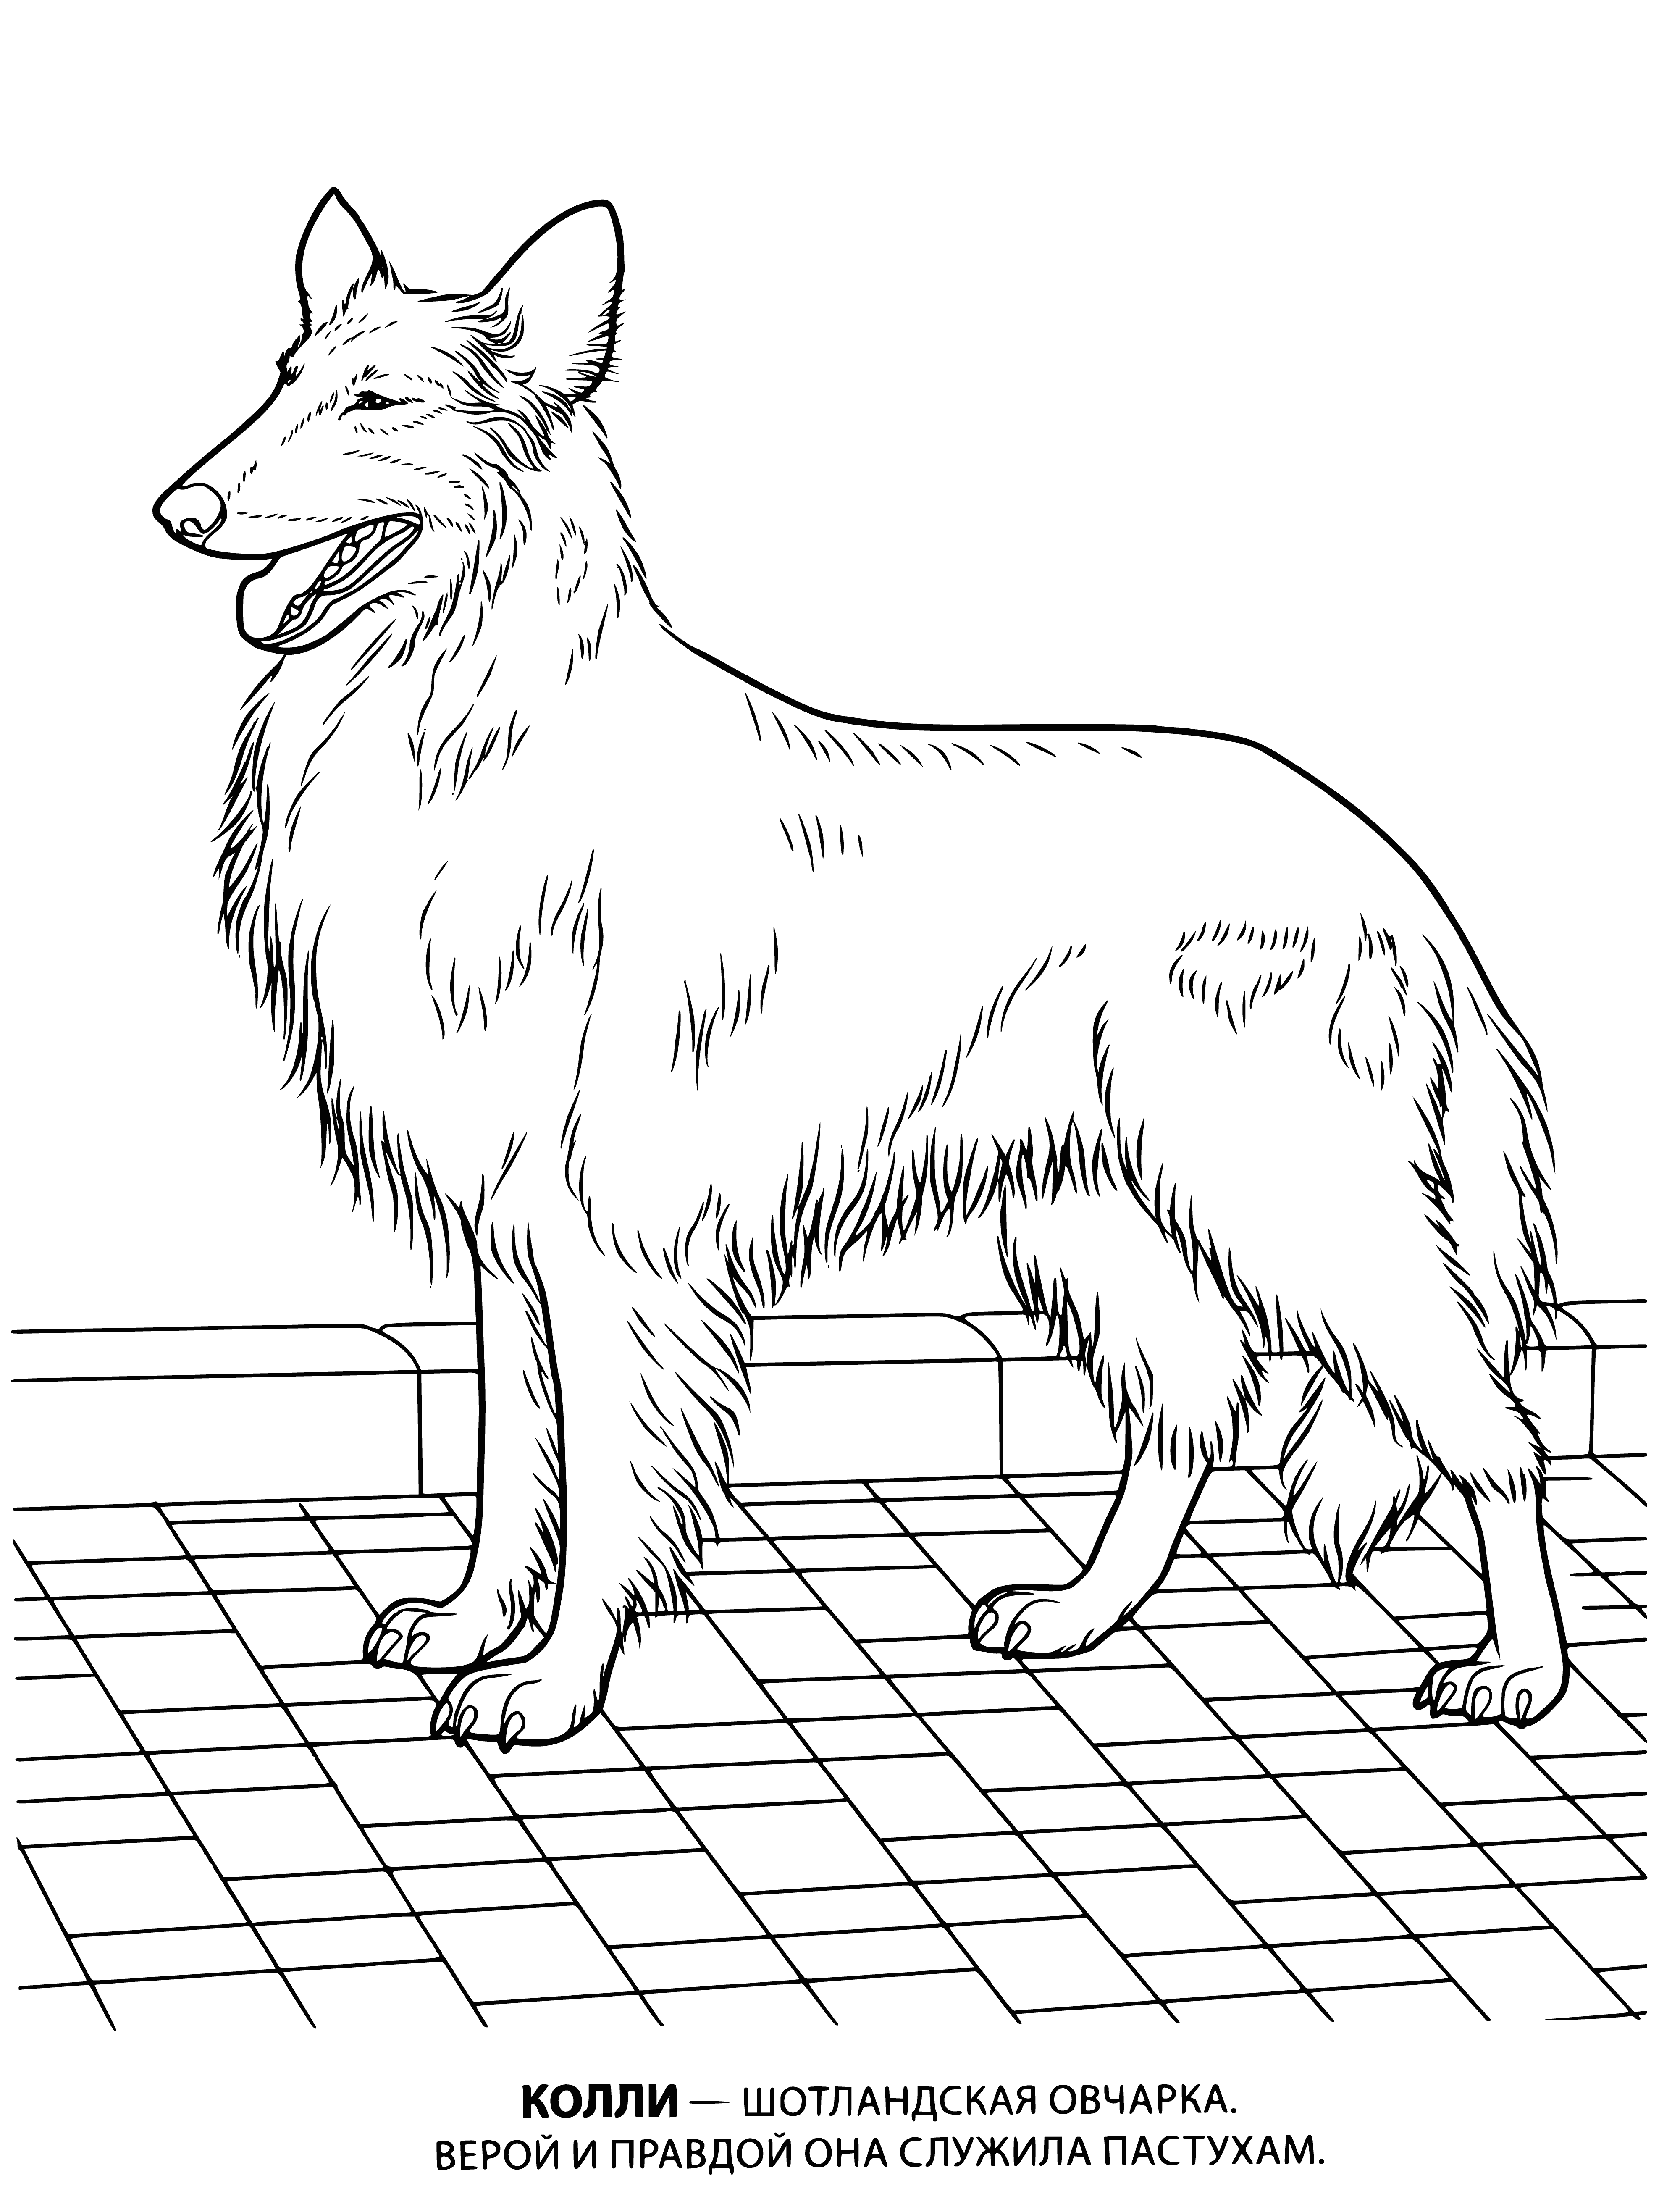 coloring page: A collie with black and white coat stands in a grassy field, tail pointing up. Trees in the background. #coloring #dog